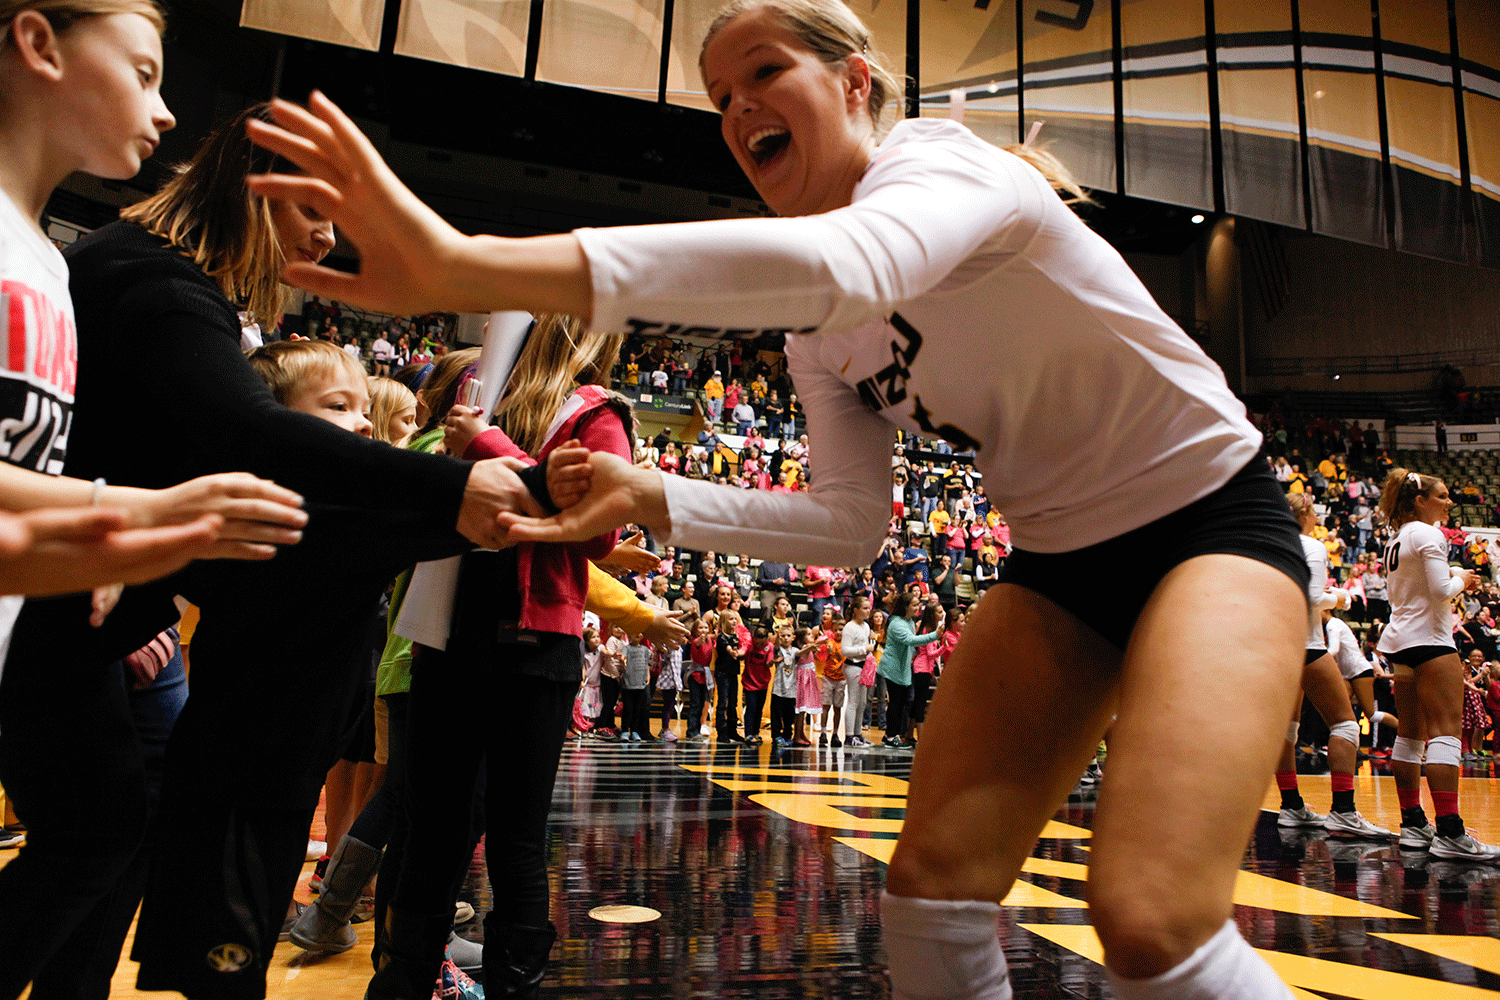 Ali Krecklow, Mizzou's sophomore setter, runs around the edge of the court, giving high fives to small Tiger fans before the match.